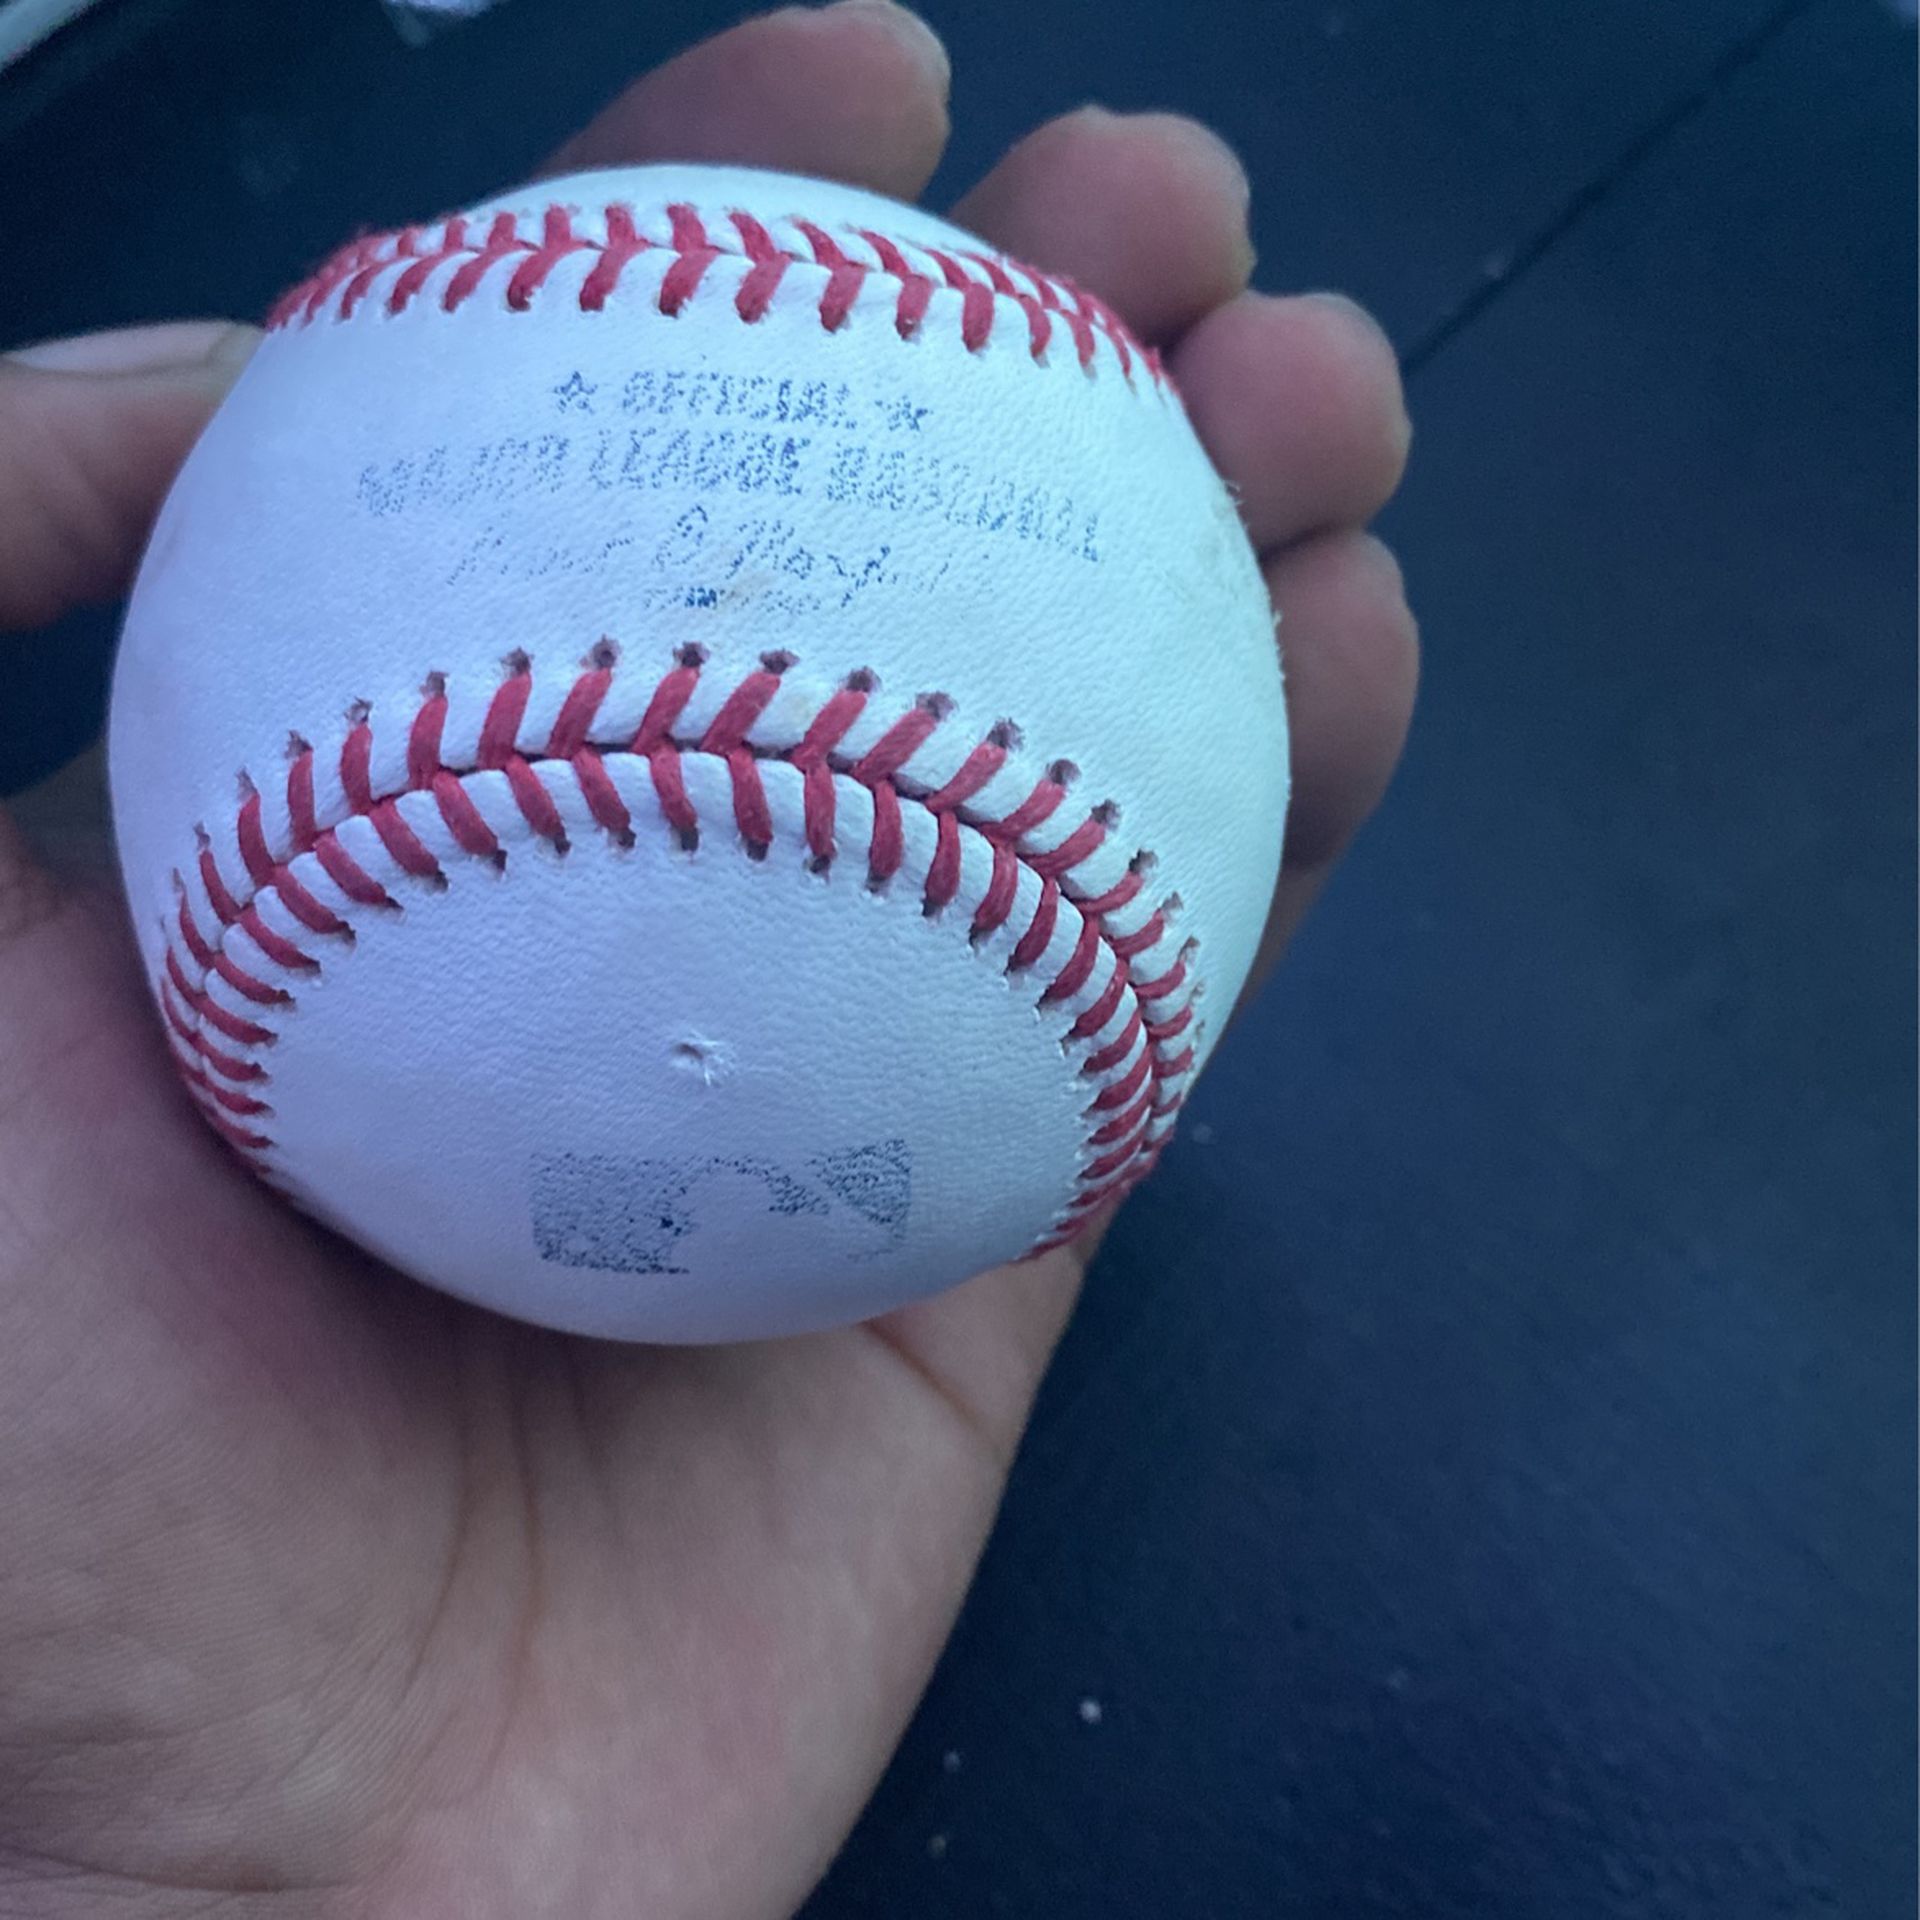 Official MLB (in Game Ball) For The Detroit Tigers Vs. Astros